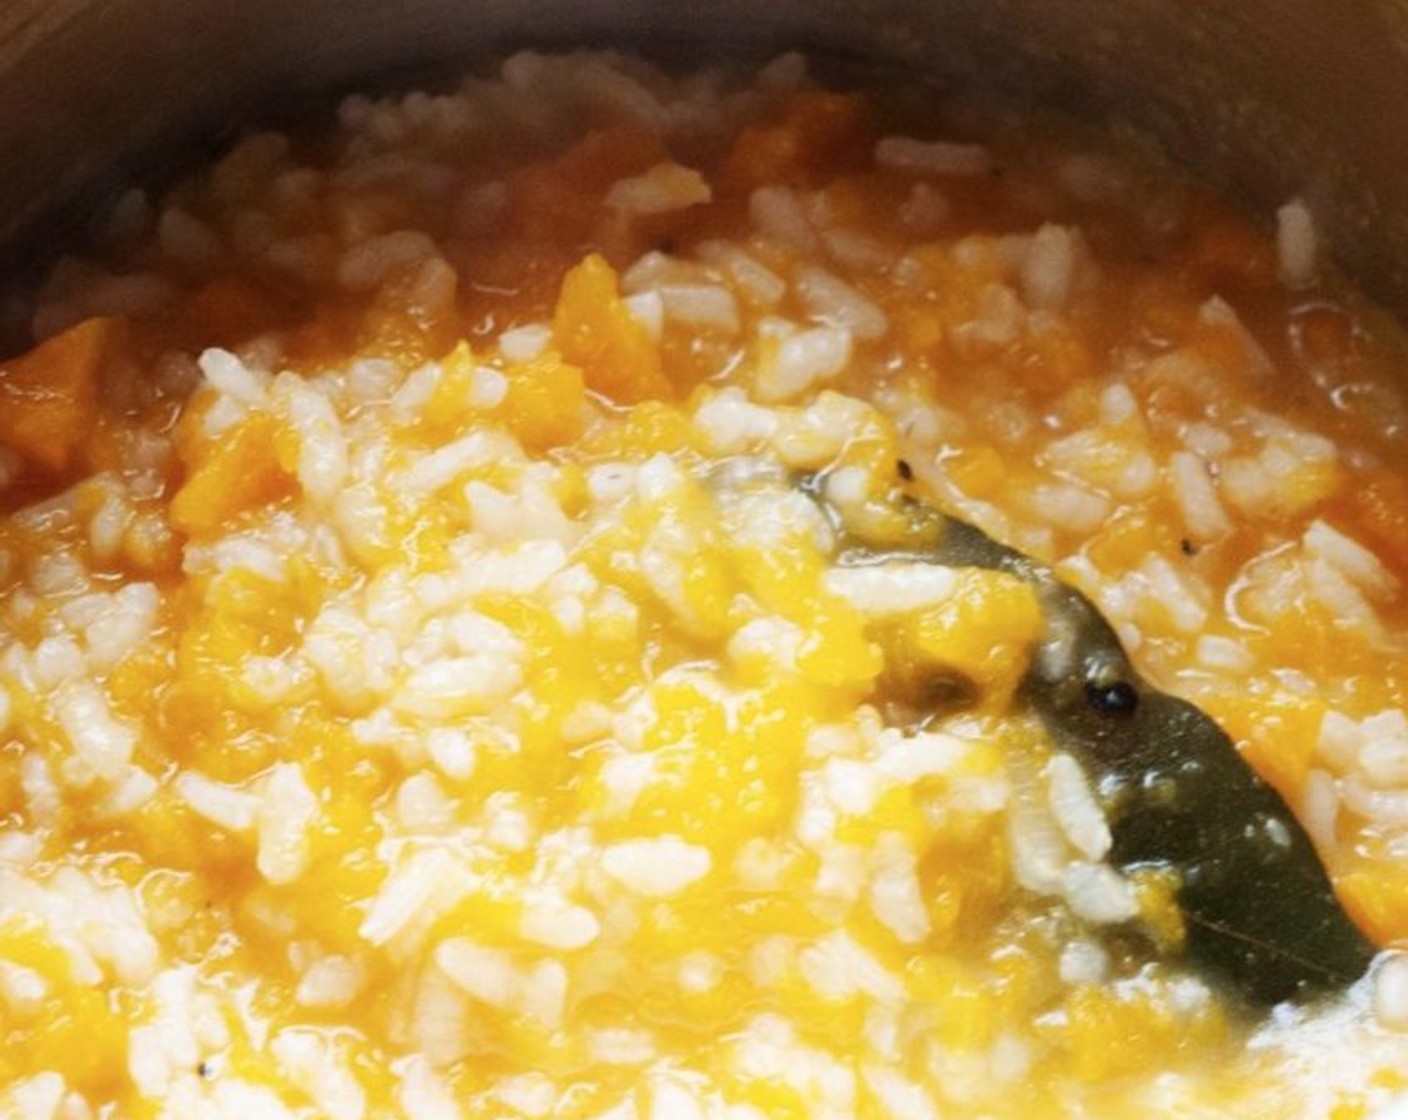 step 3 Add Pumpkin (1 cup), Sage Leaves (2), Salt (to taste) and Ground Black Pepper (to taste), and just enough Water (to taste) to cover the rice. Bring to a simmer, cover with a lid and let it cook, stirring occasionally until rice is fully cooked. Add more water if needed.